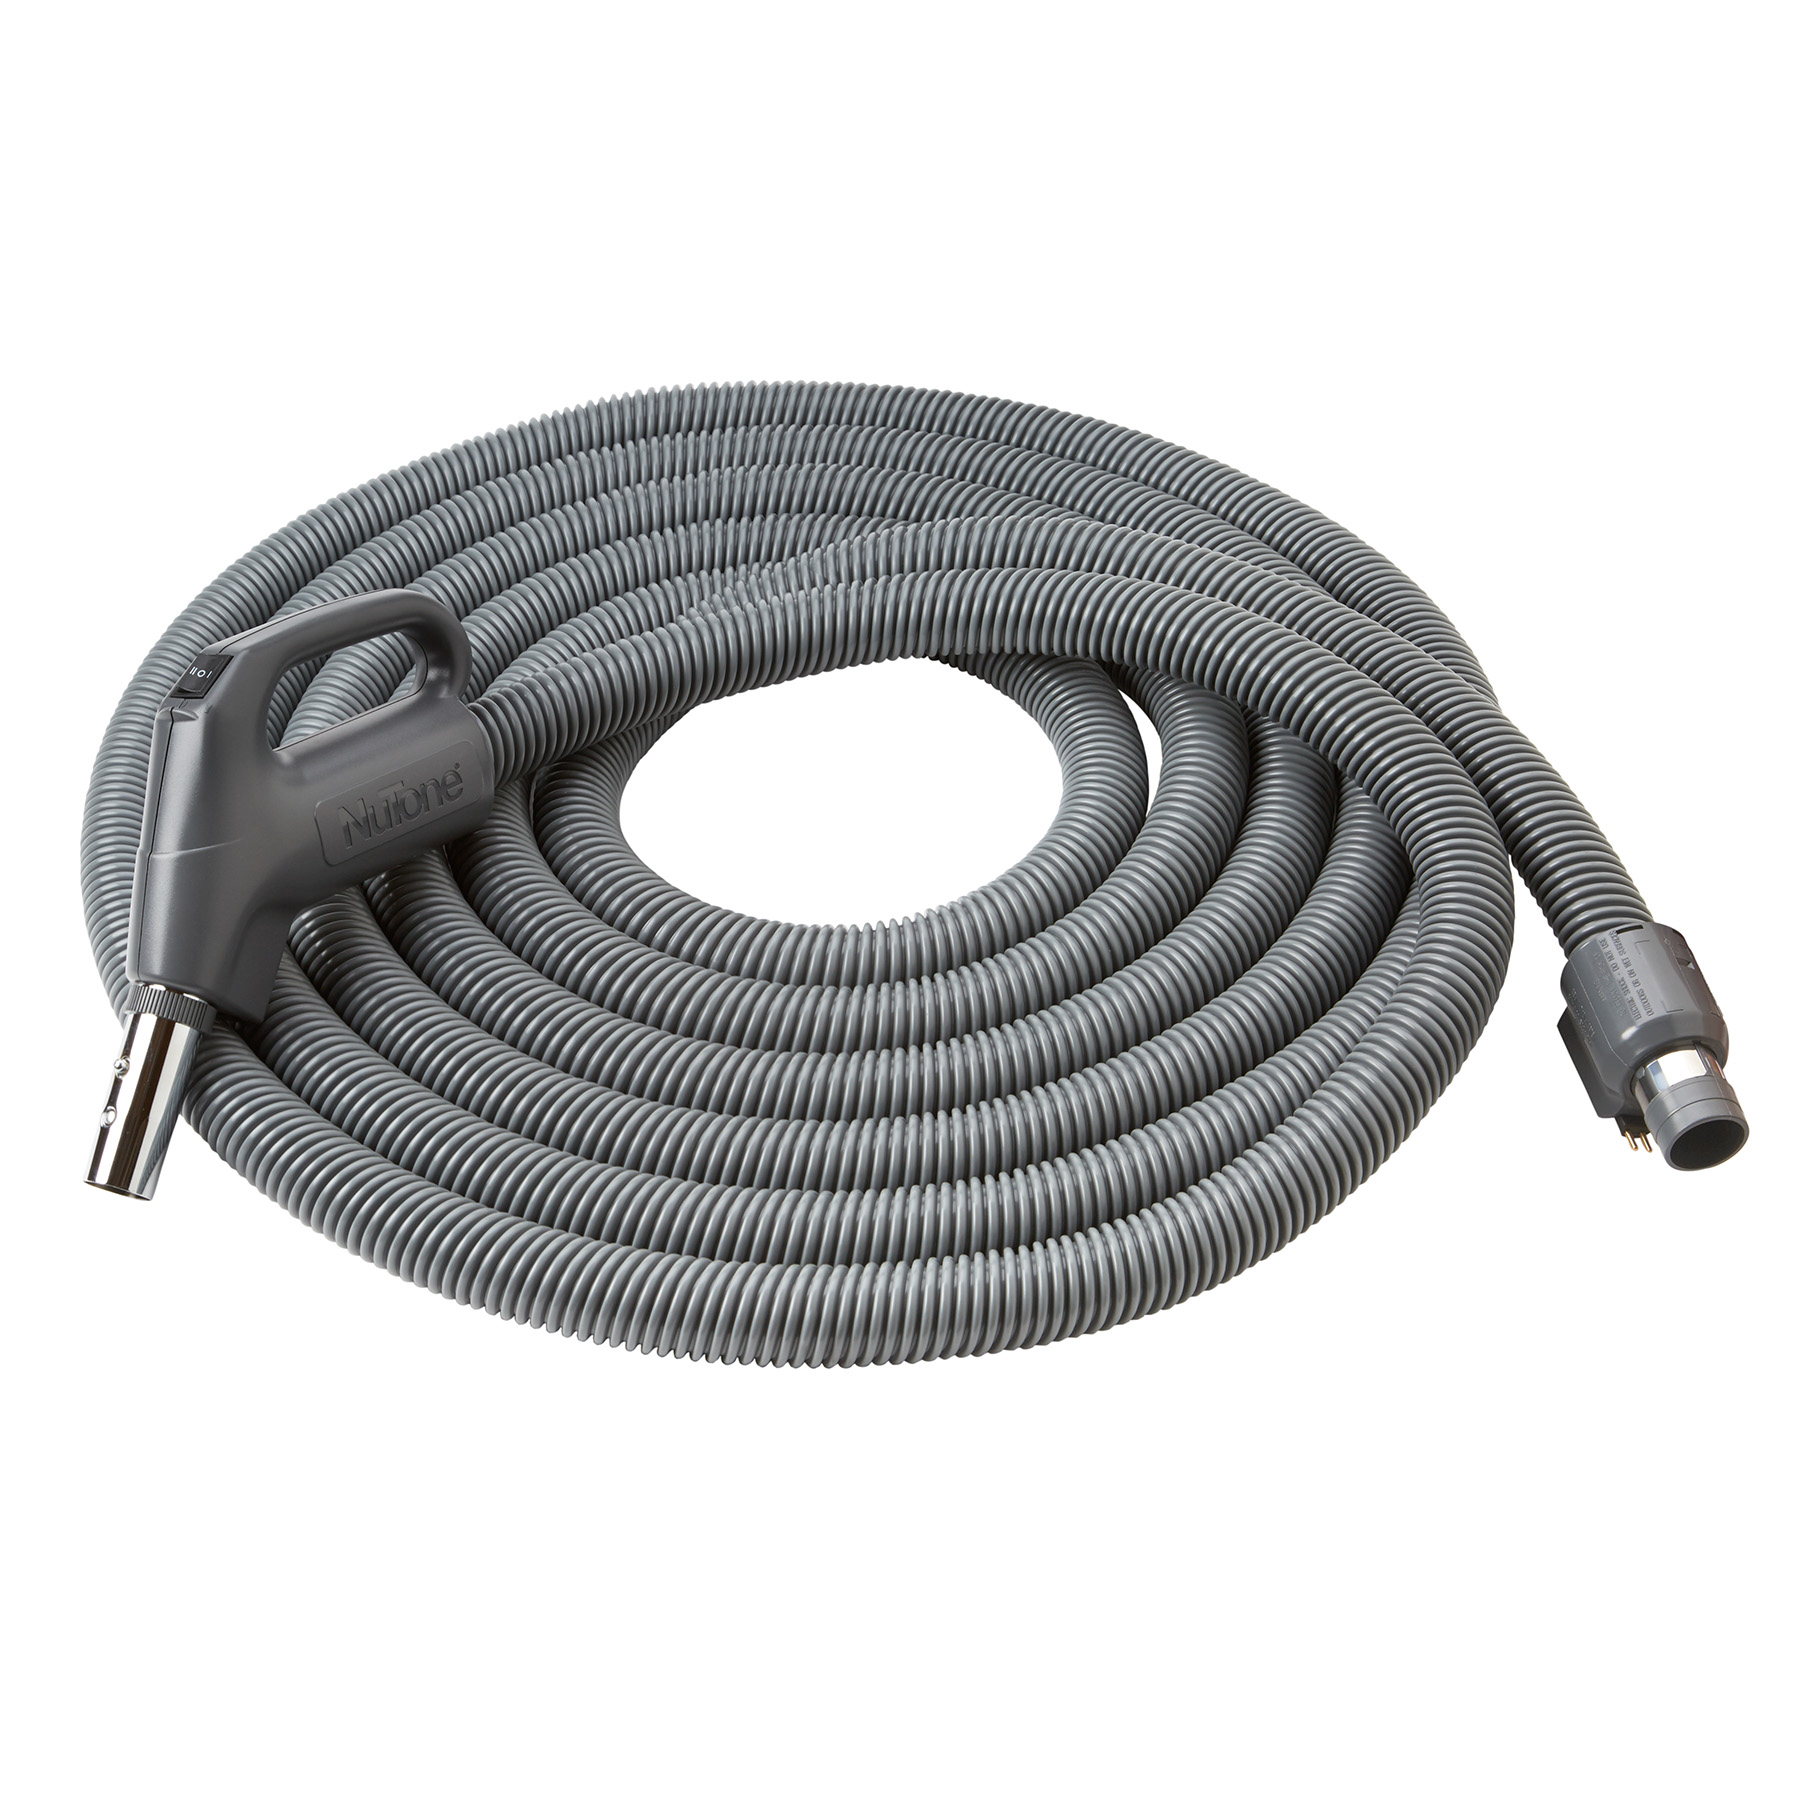 NuTone® 30' Direct-Connect Crushproof Hose